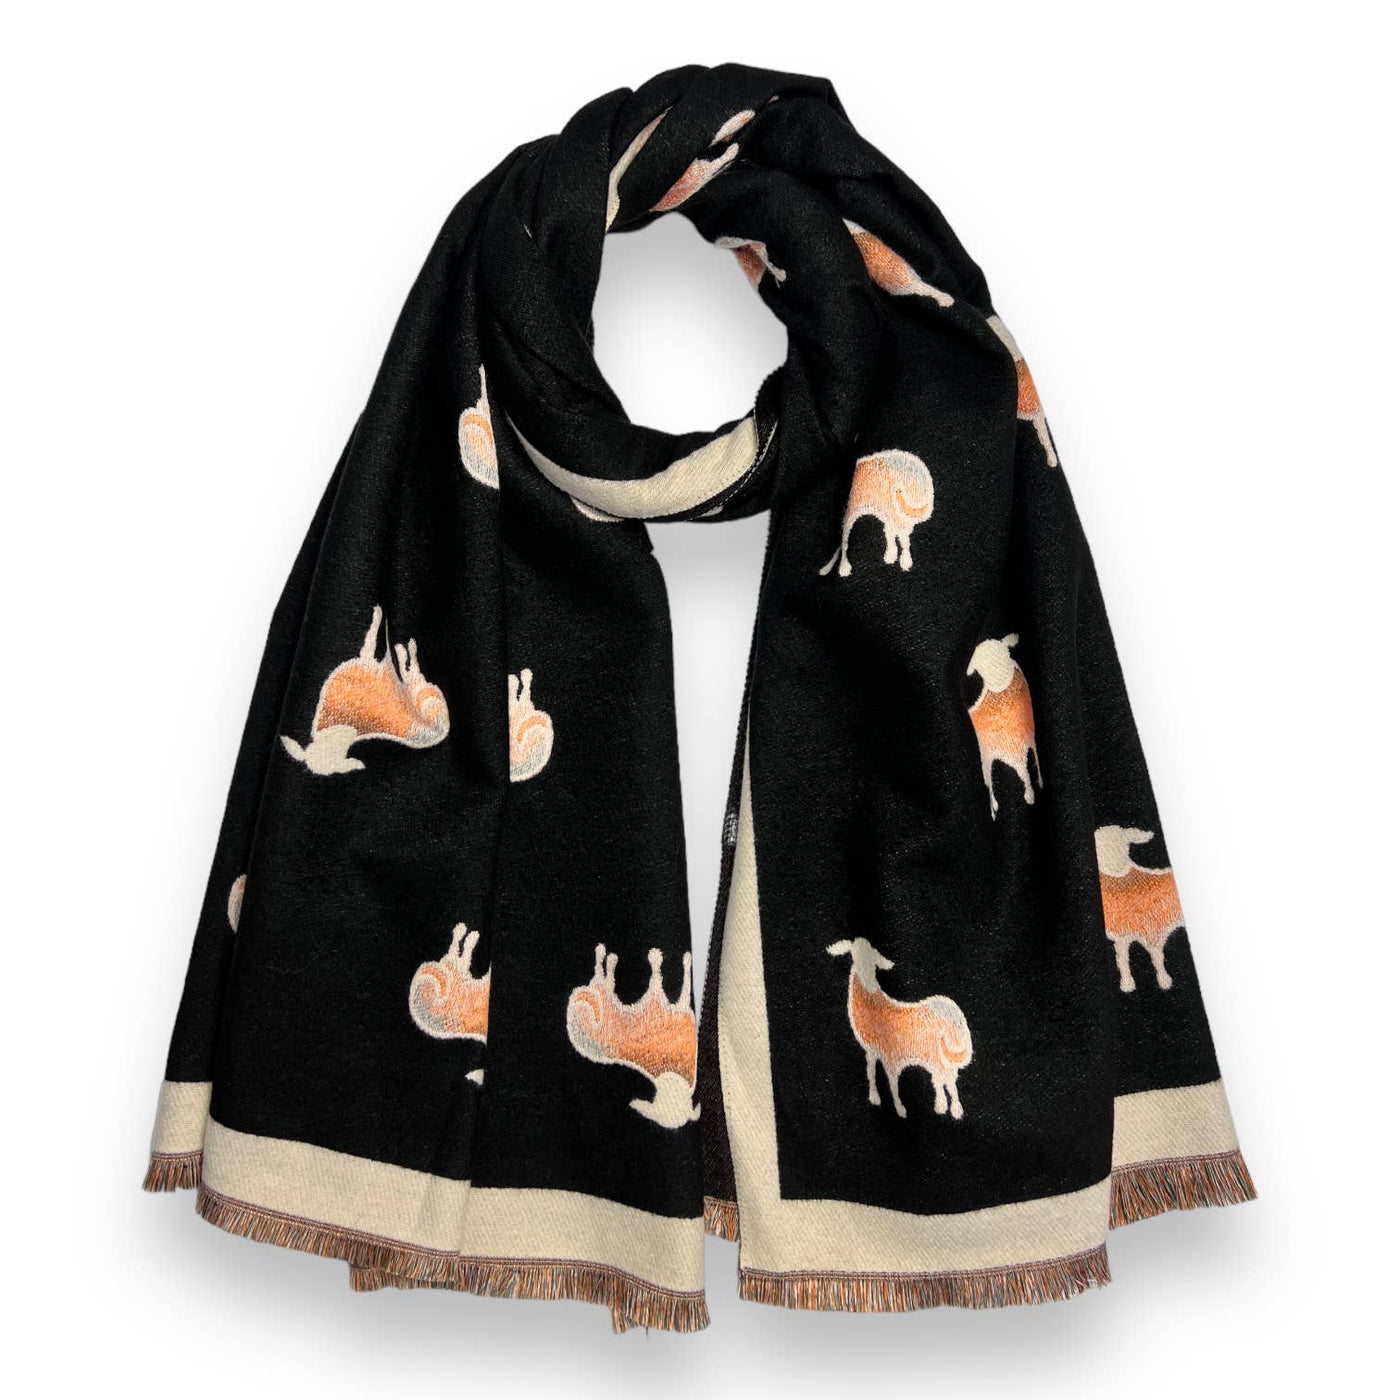 Sheep print on cashmere blend scarf